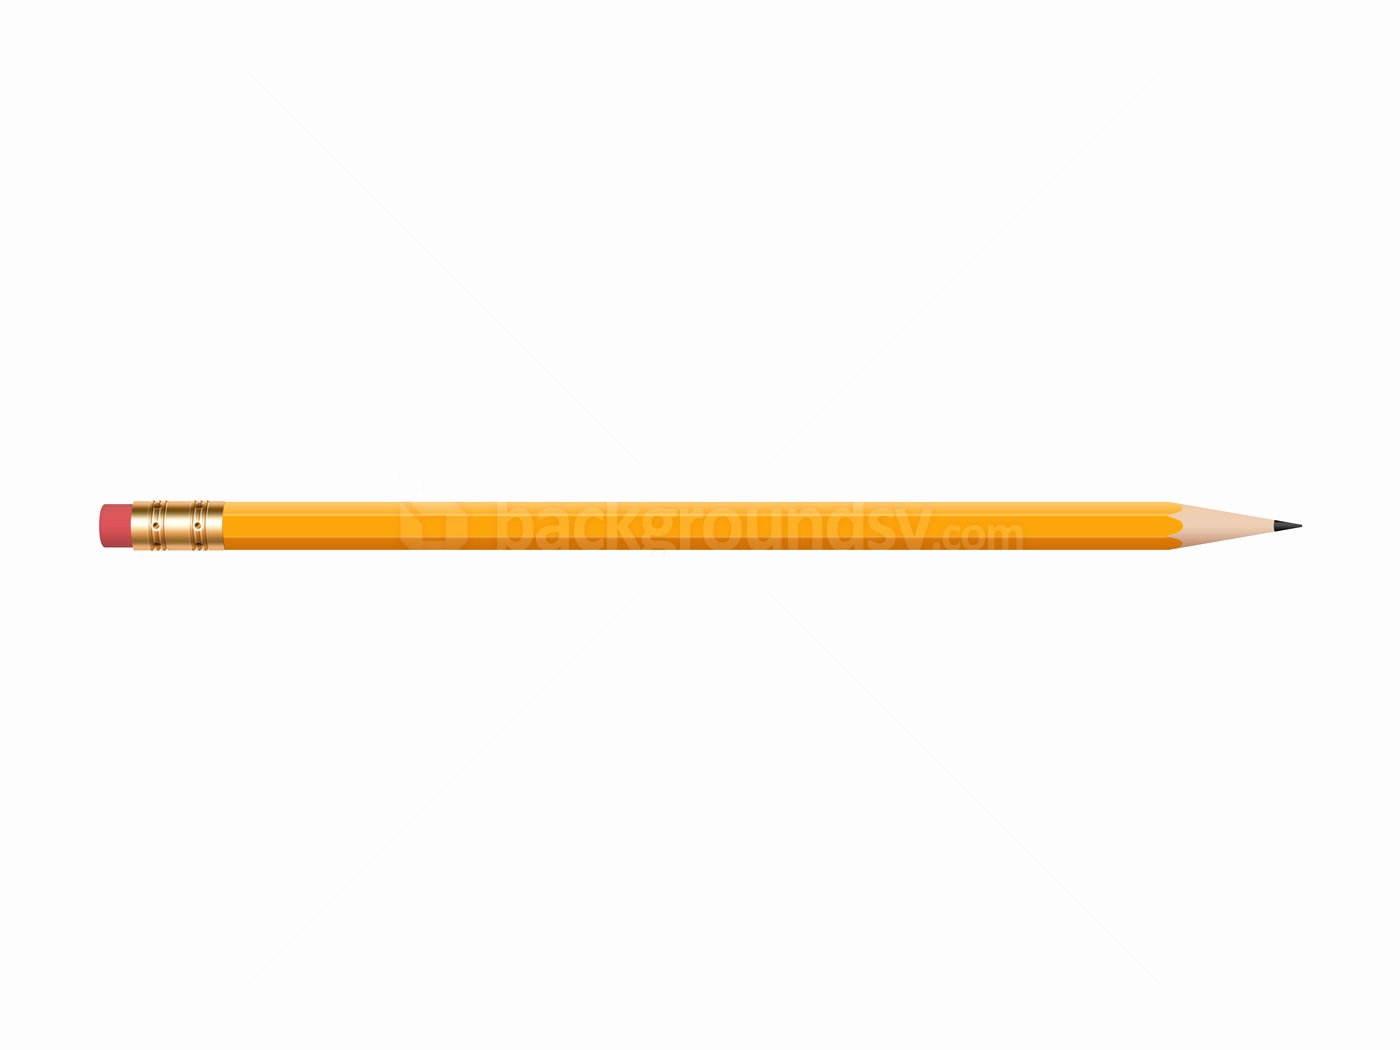 A Picture Of A Pencil New Pencil